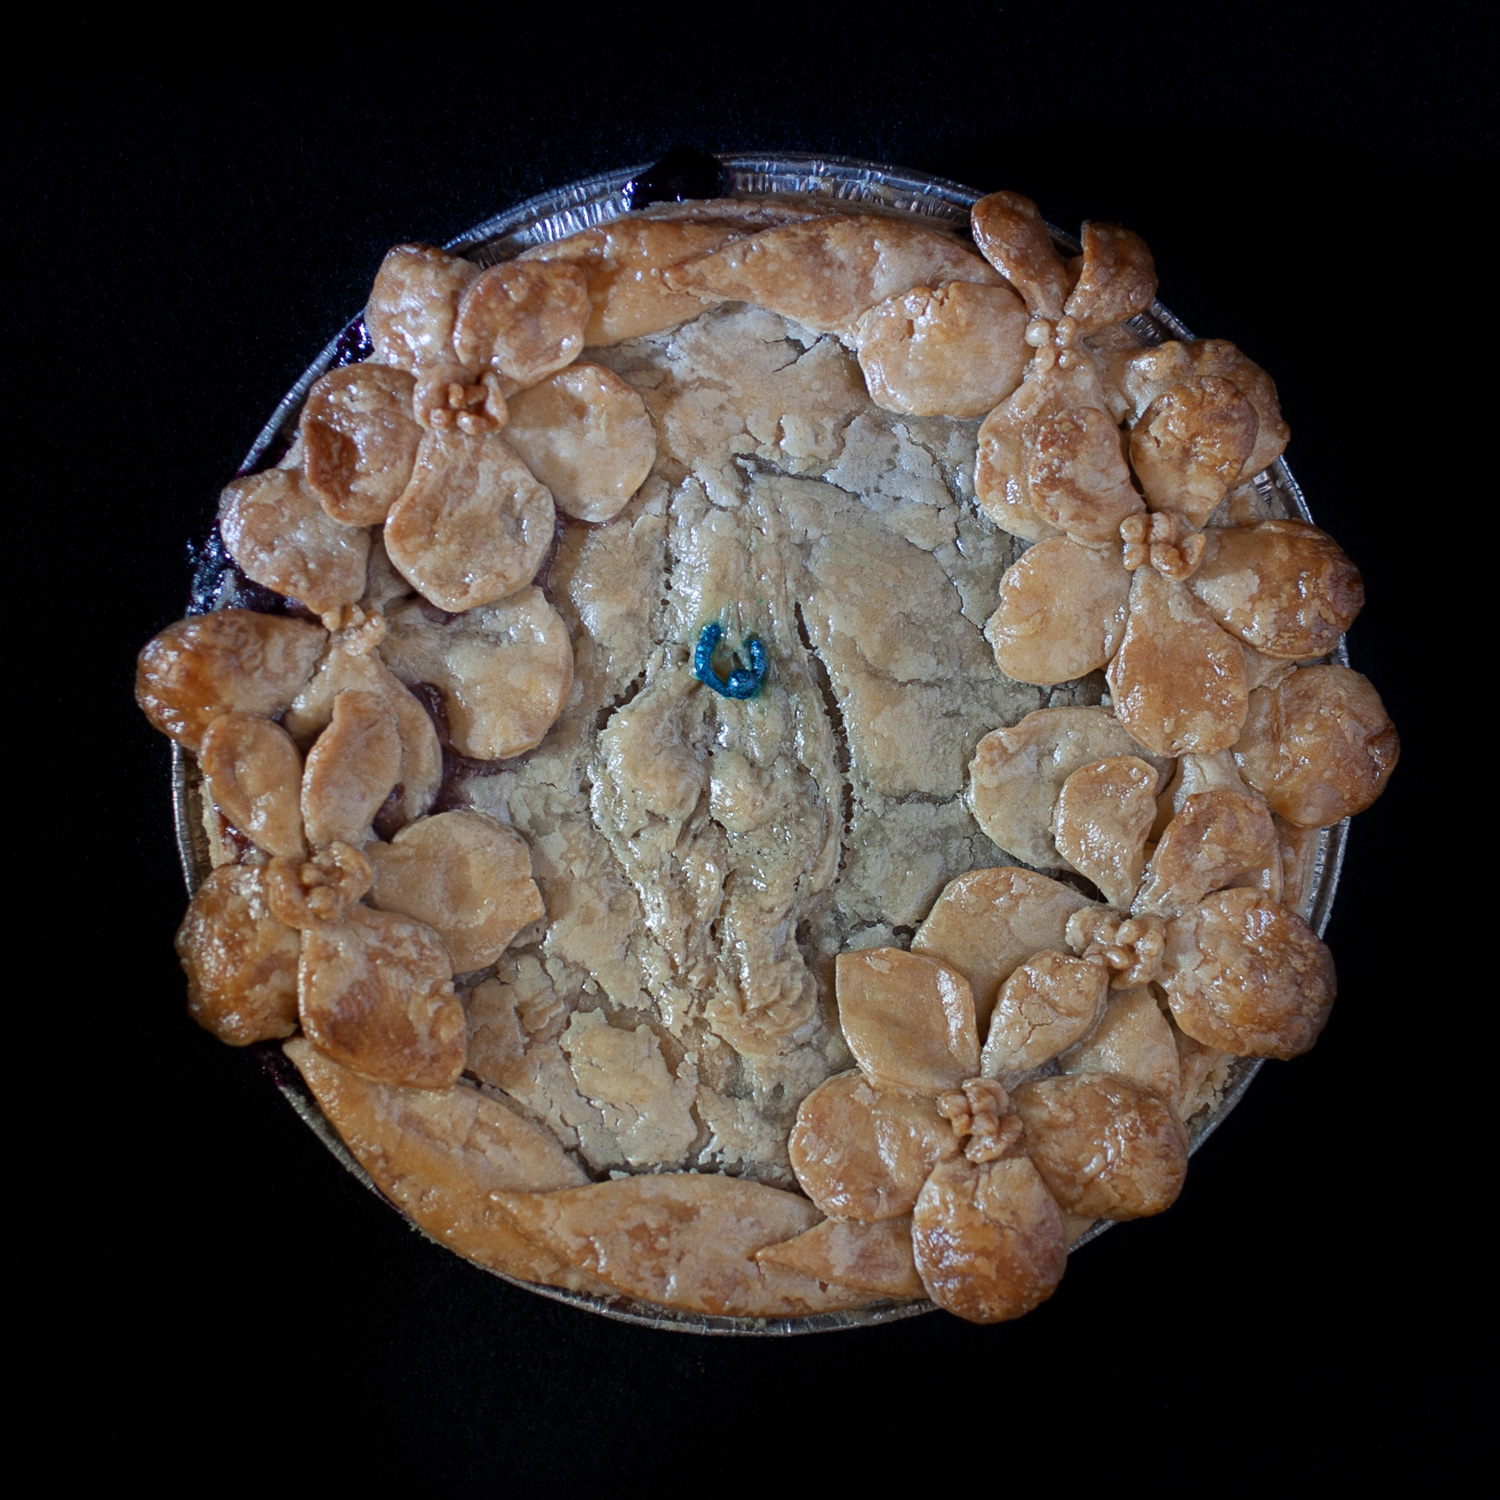 Baked pie on a black background. The pie crust art features a wreath of hand made violets and a pierced vulva with a blue clitoral hood piercing.